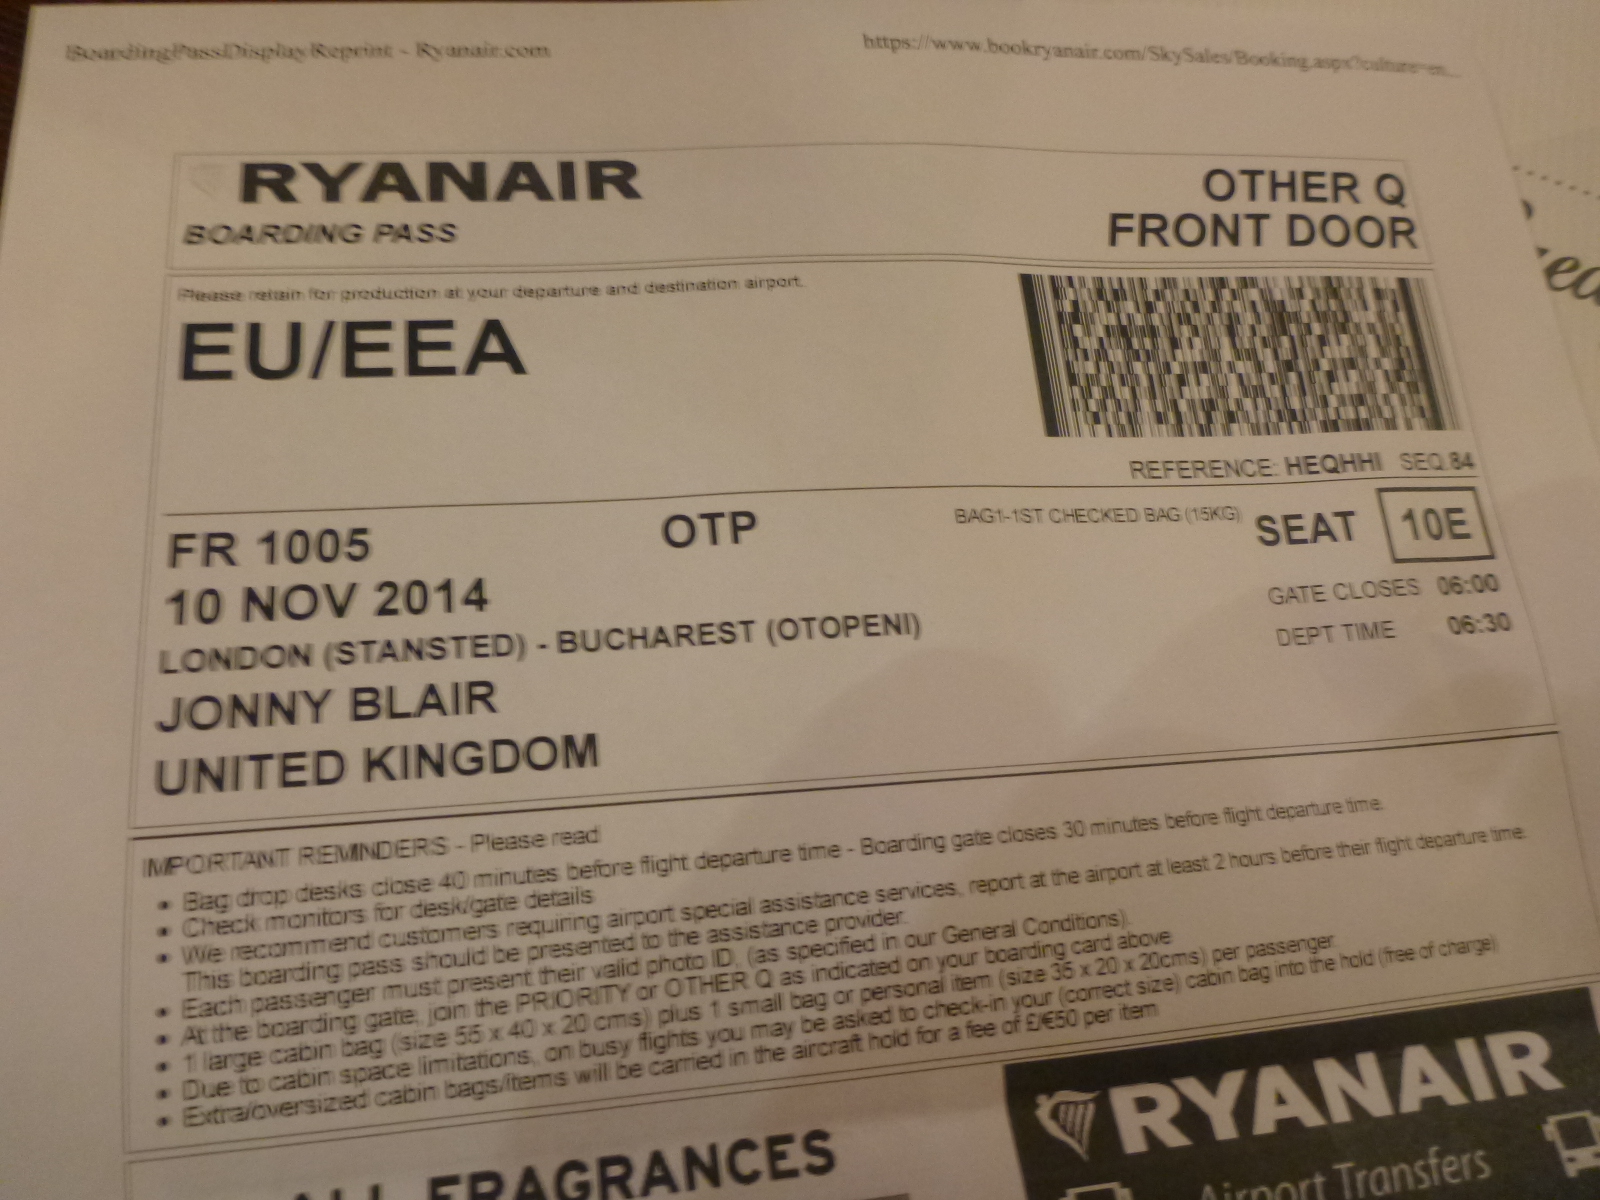 Tuesday's Travel Essentials: to Print Flight Tickets in London, England - Don't Living